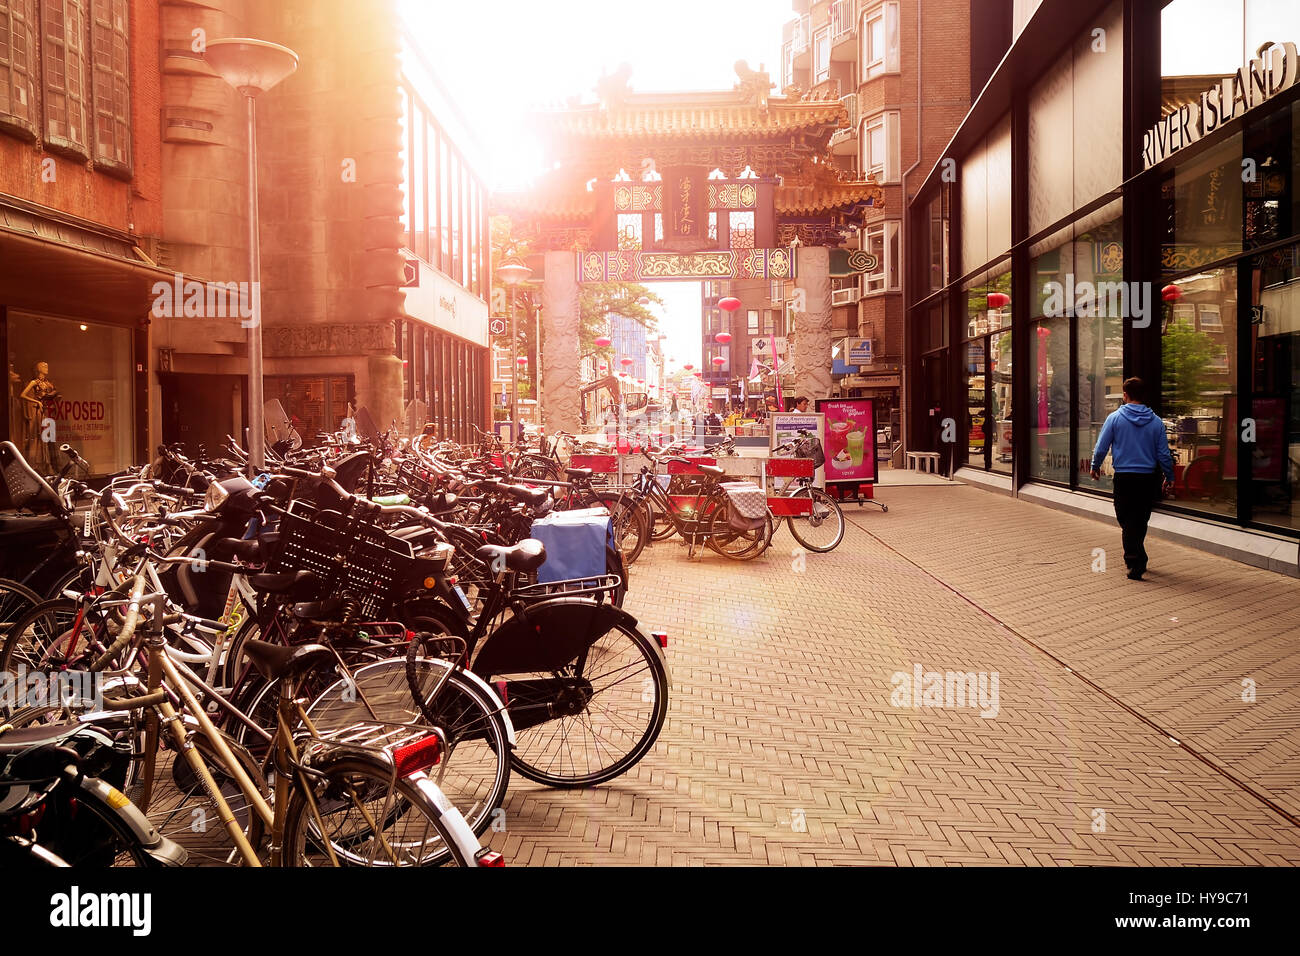 Chinatown in the center in The Hague, Netherlands Stock Photo